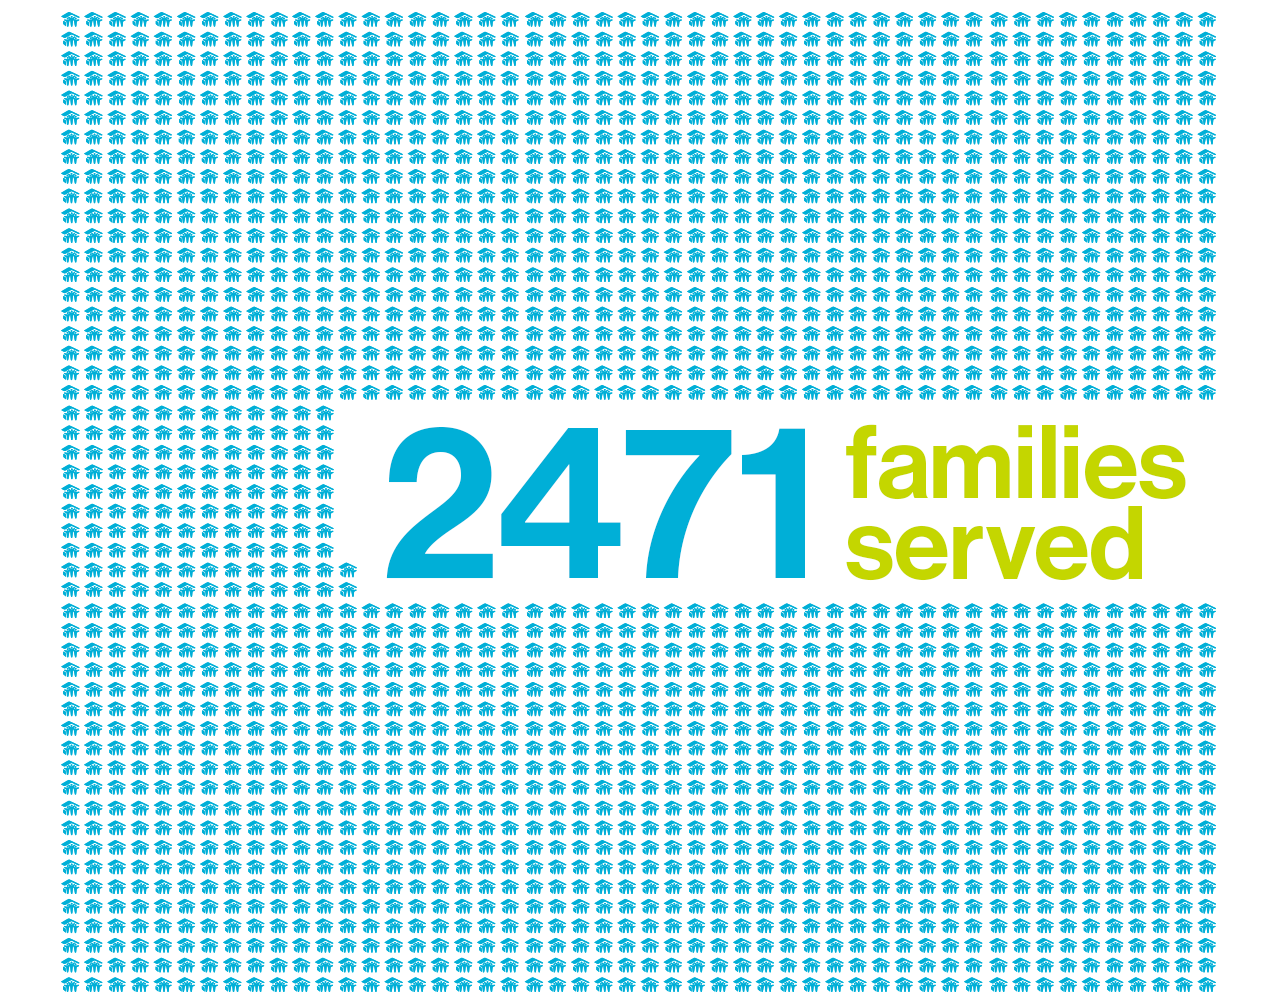 Families Served 2021